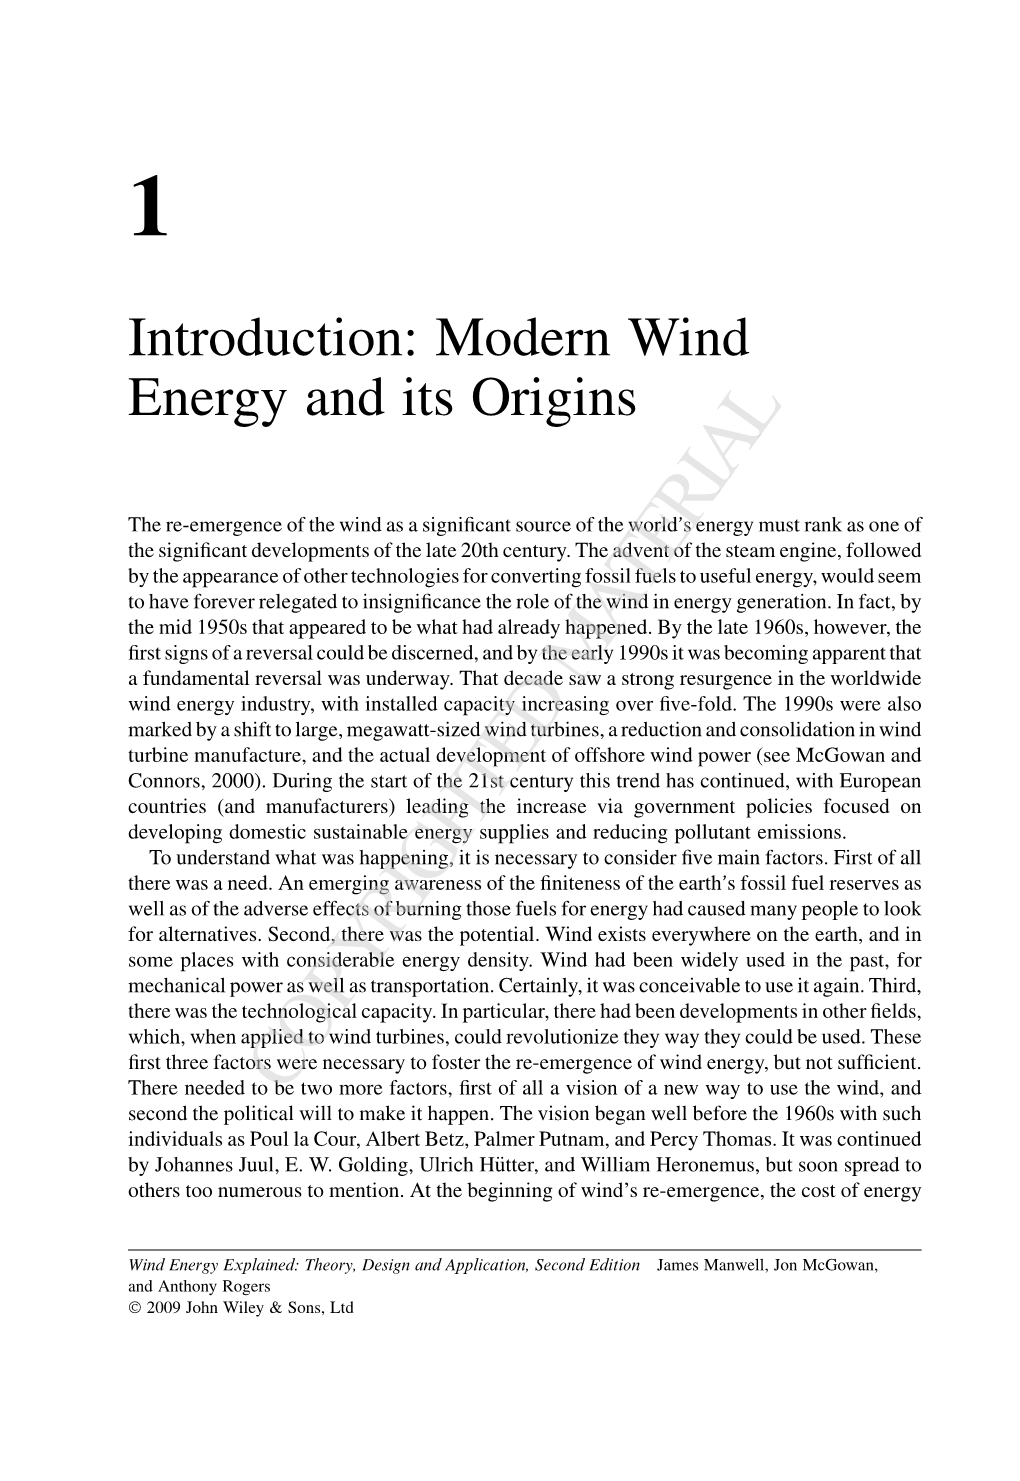 Introduction: Modern Wind Energy and Its Origins